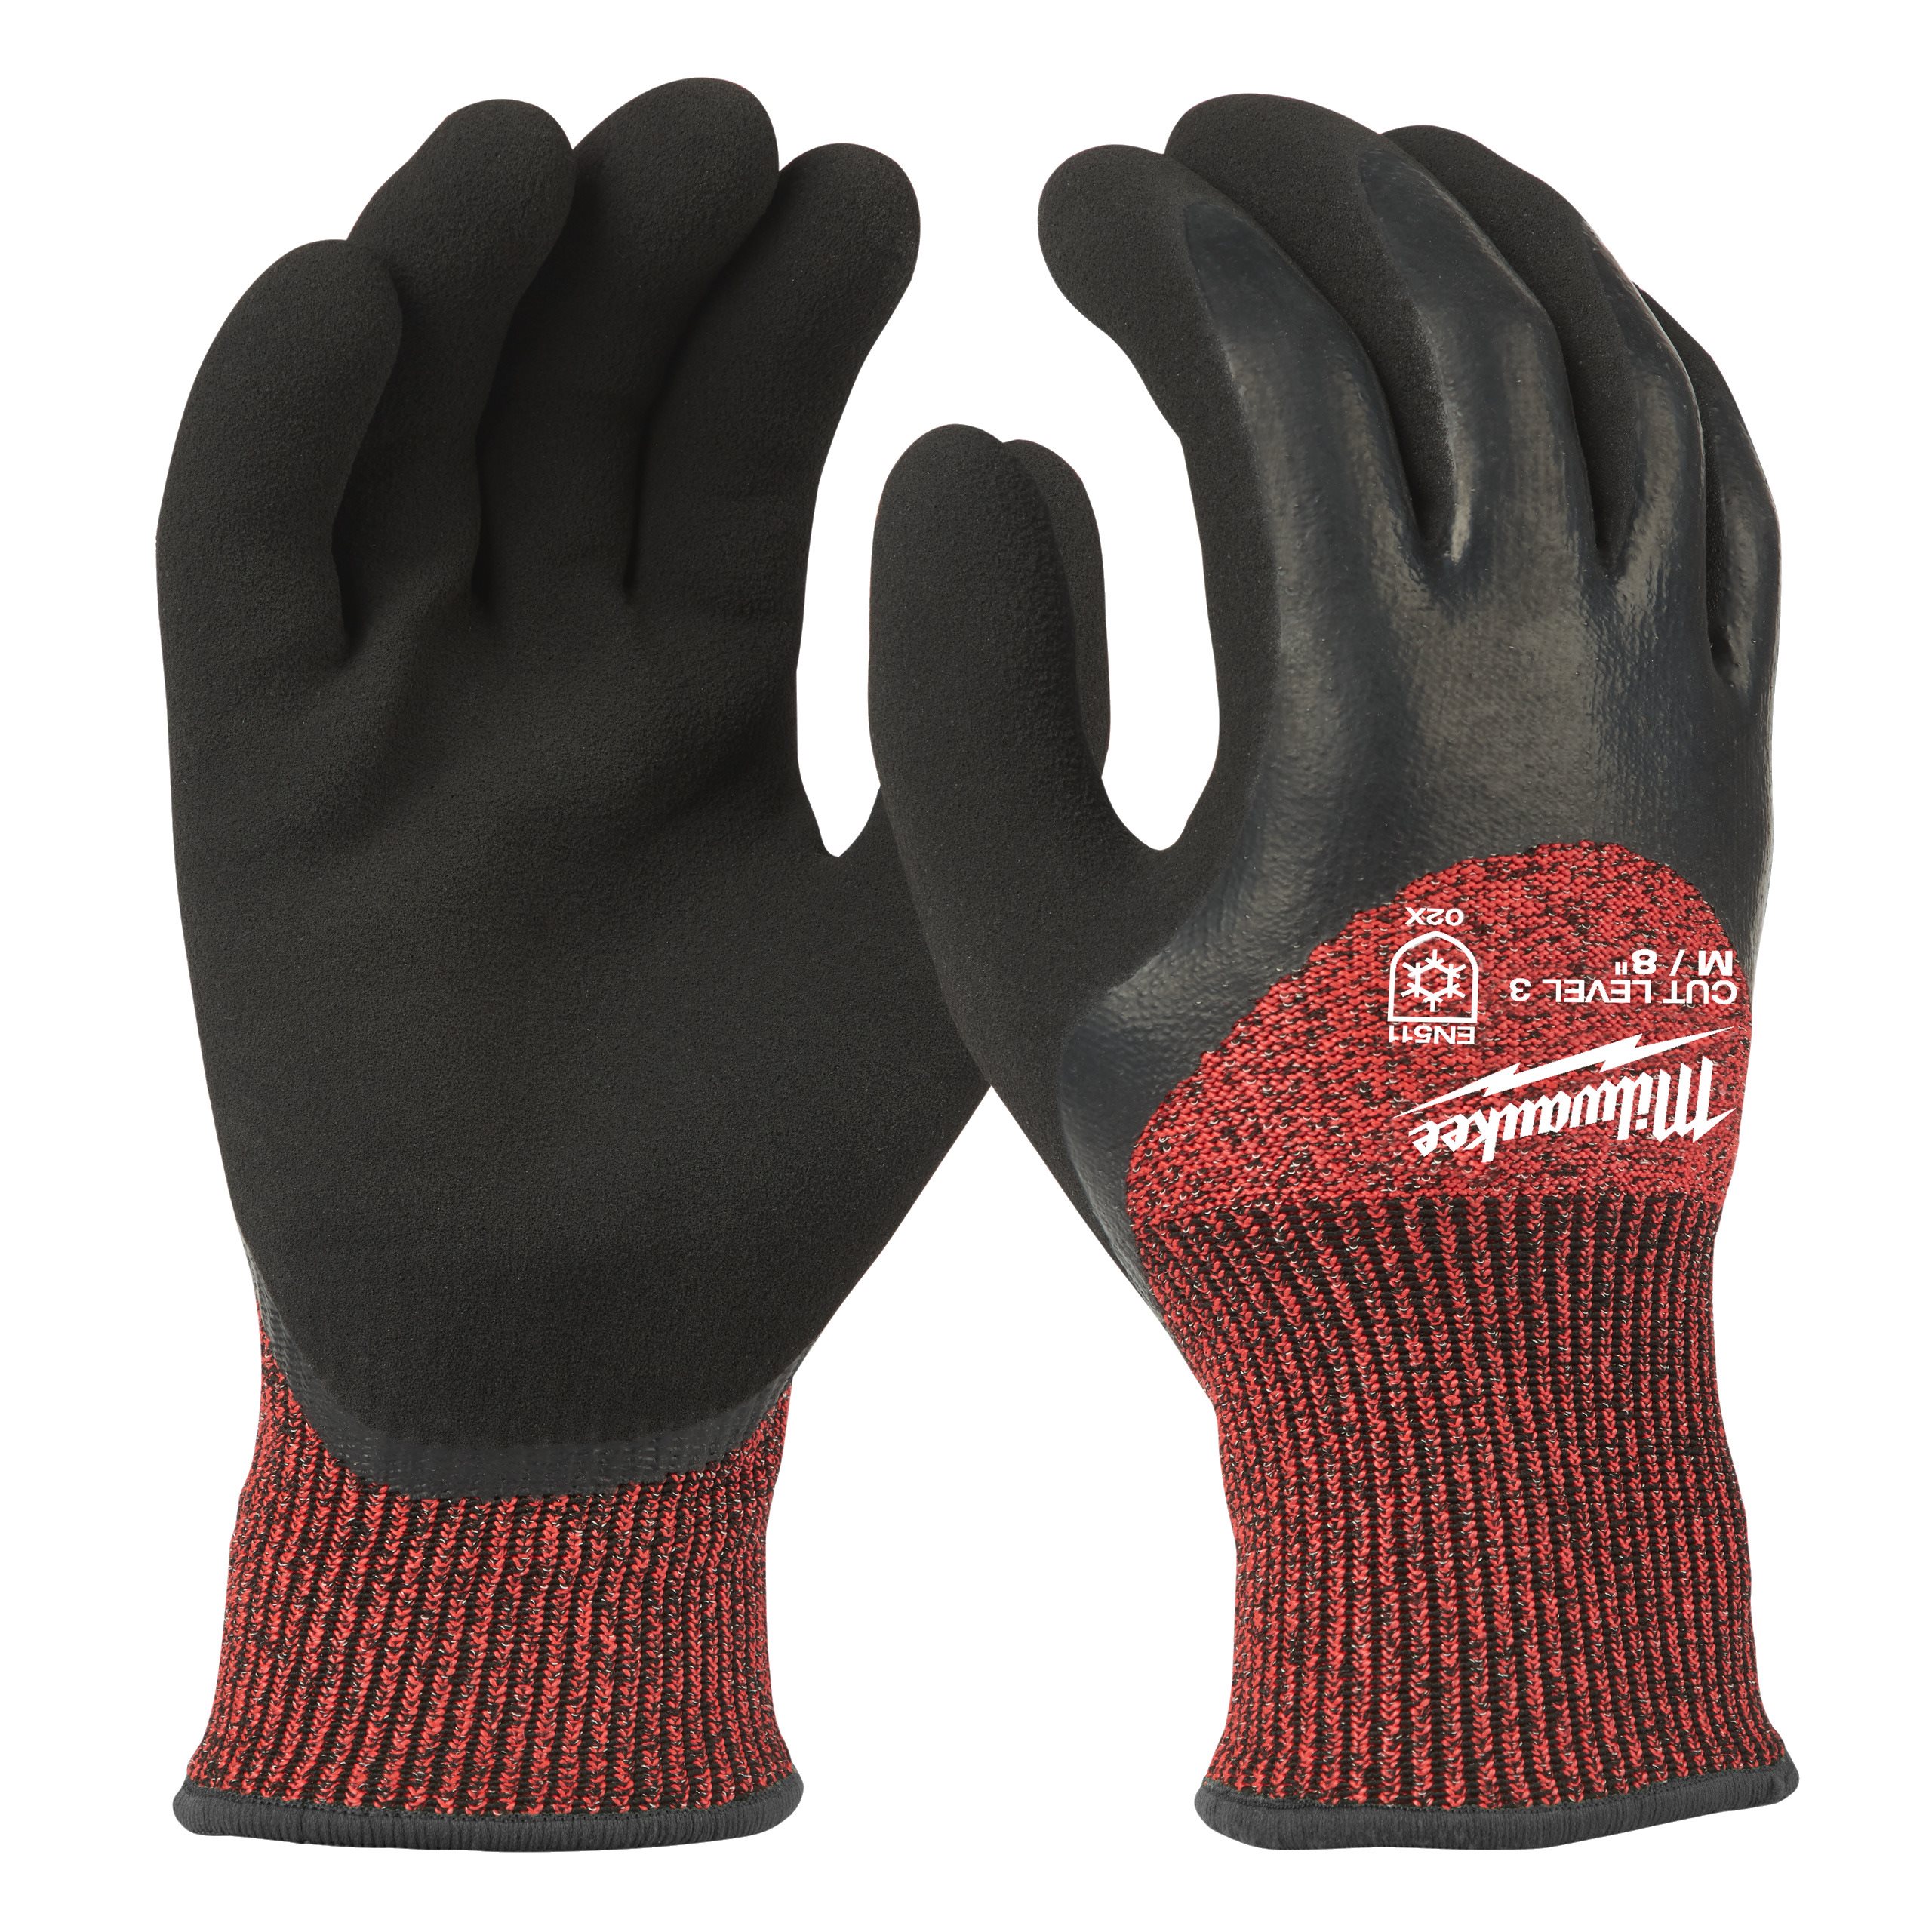 Winter cut level 3/C dipped gloves 